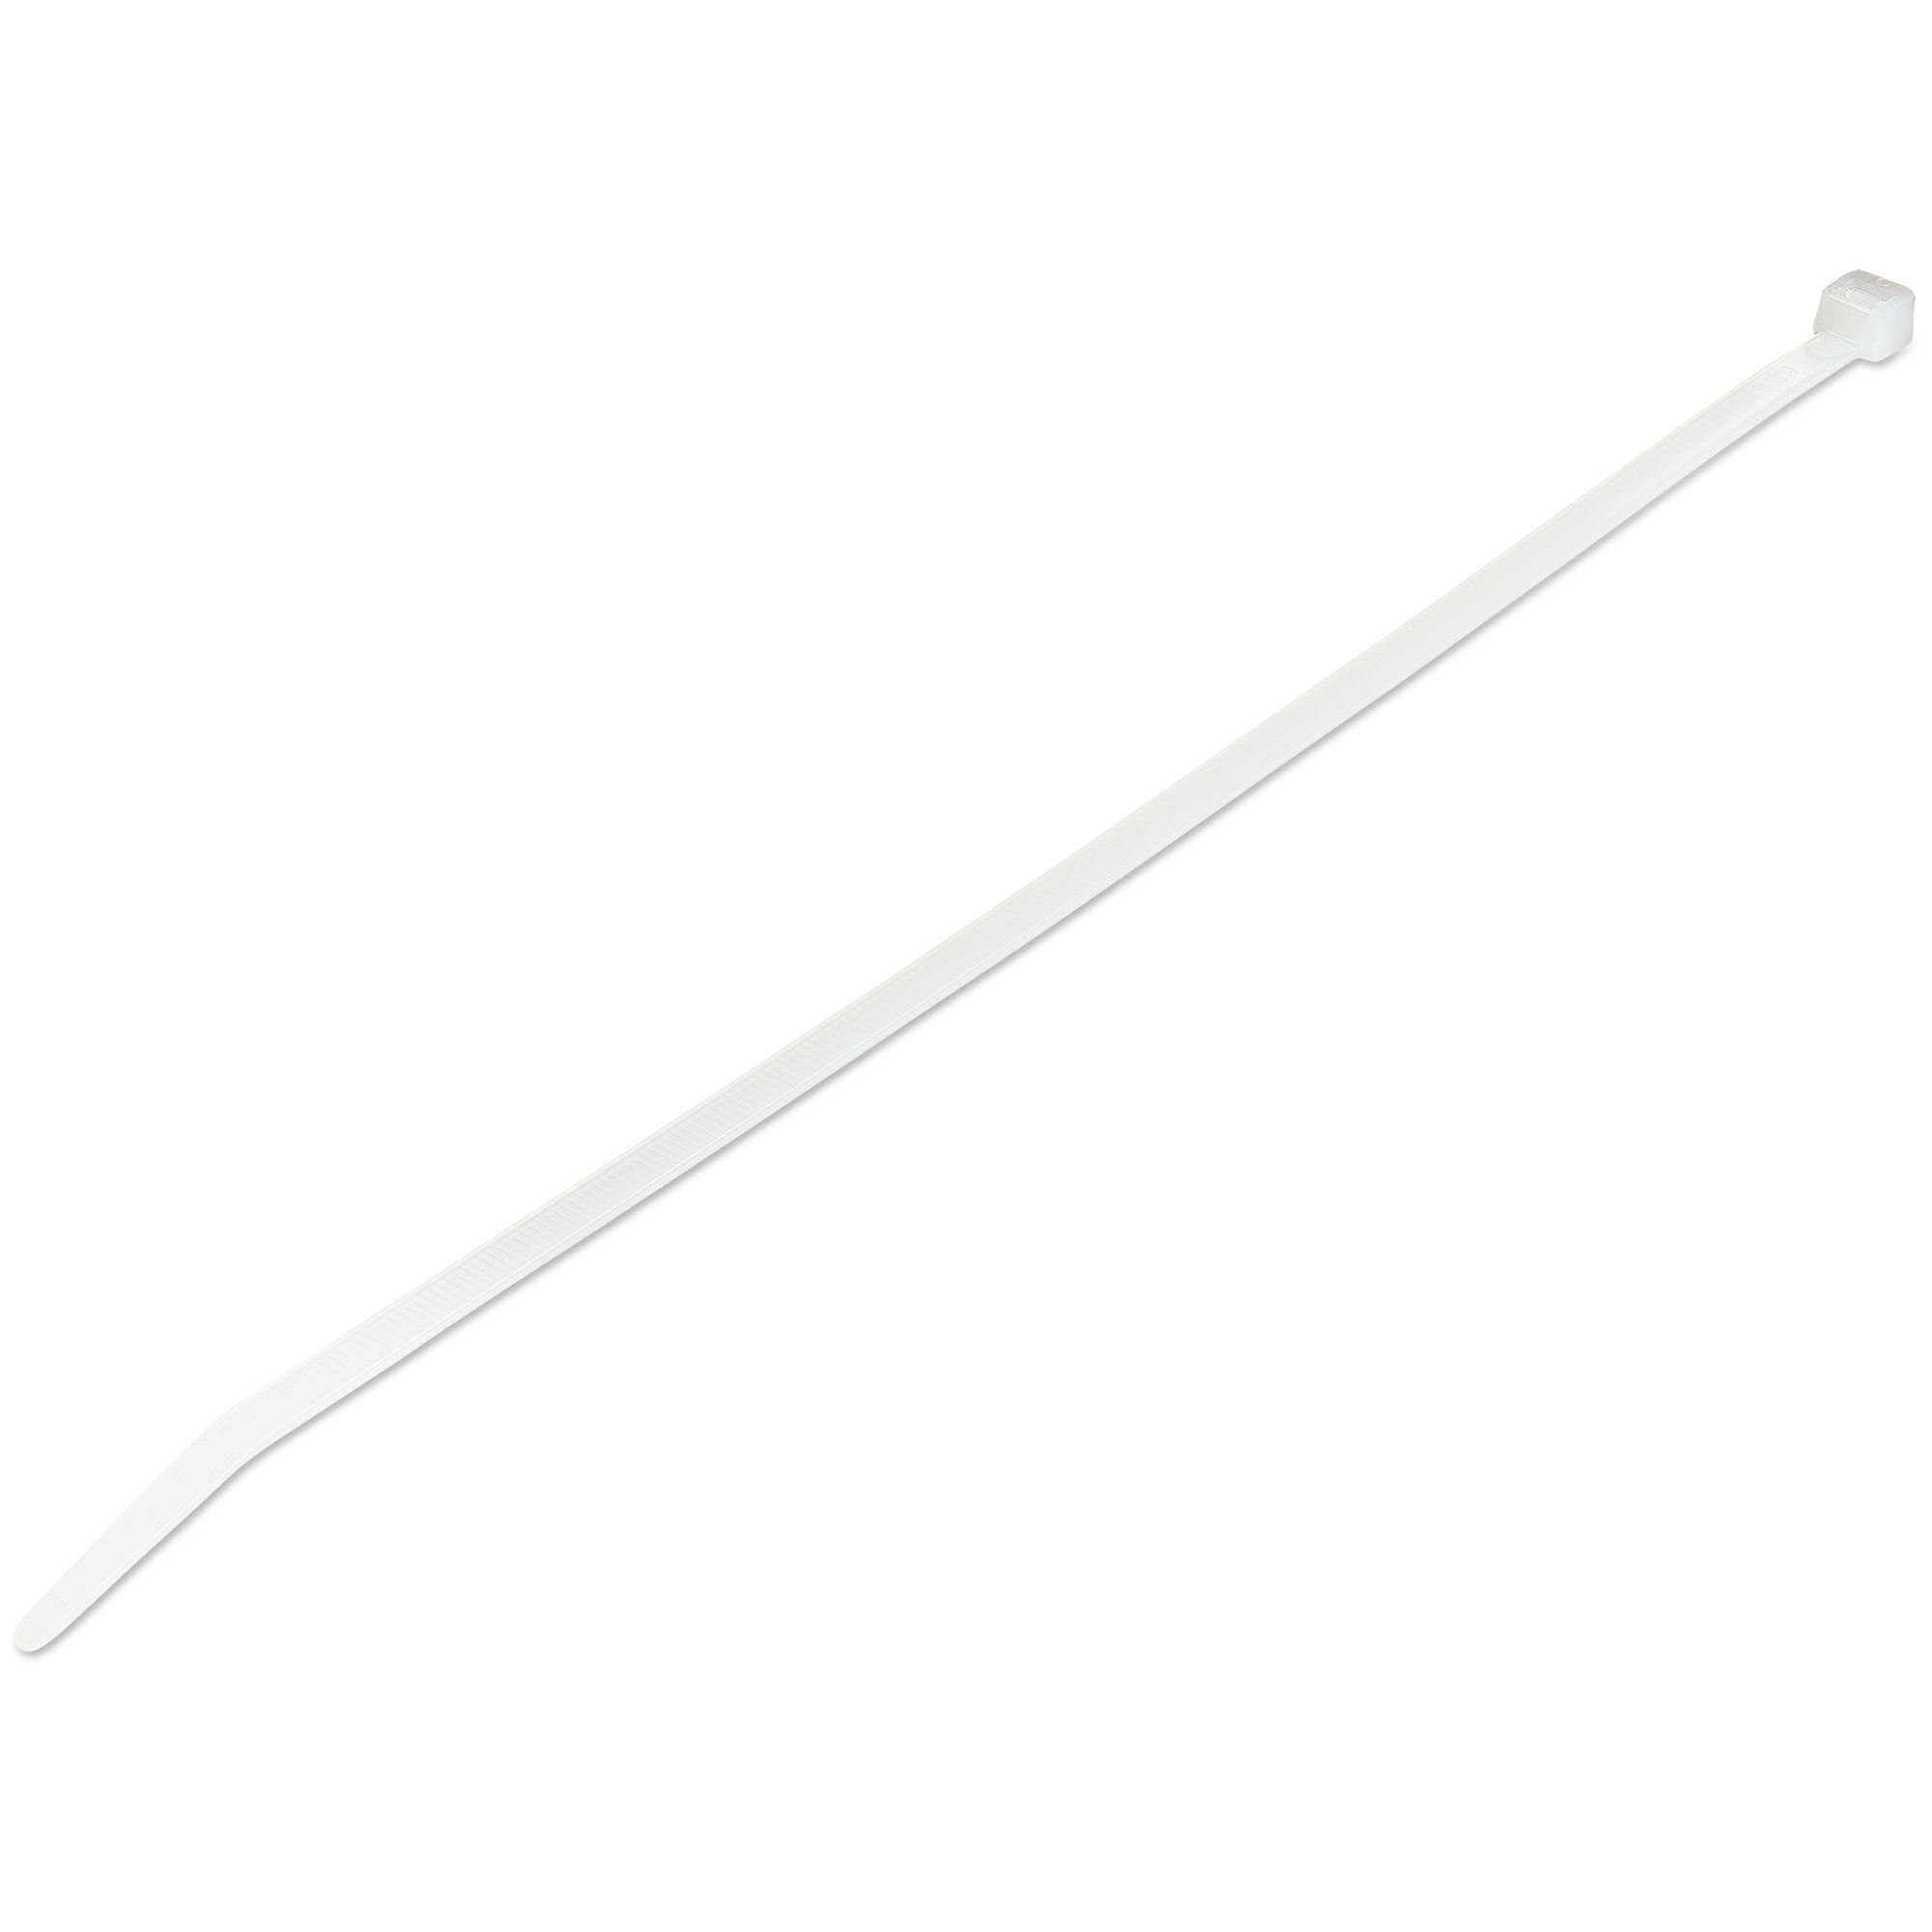 StarTech.com 10"(25cm) Cable Ties, 1/8"(4mm) wide, 2-5/8"(68mm) Bundle Diameter, 50lb(22kg) Tensile Strength, Nylon Self Locking Zip Ties w/ Curved Tip, 94V-2/UL Listed, 100 Pack, White - Nylon 66 Plastic - TAA (CBMZT10N)